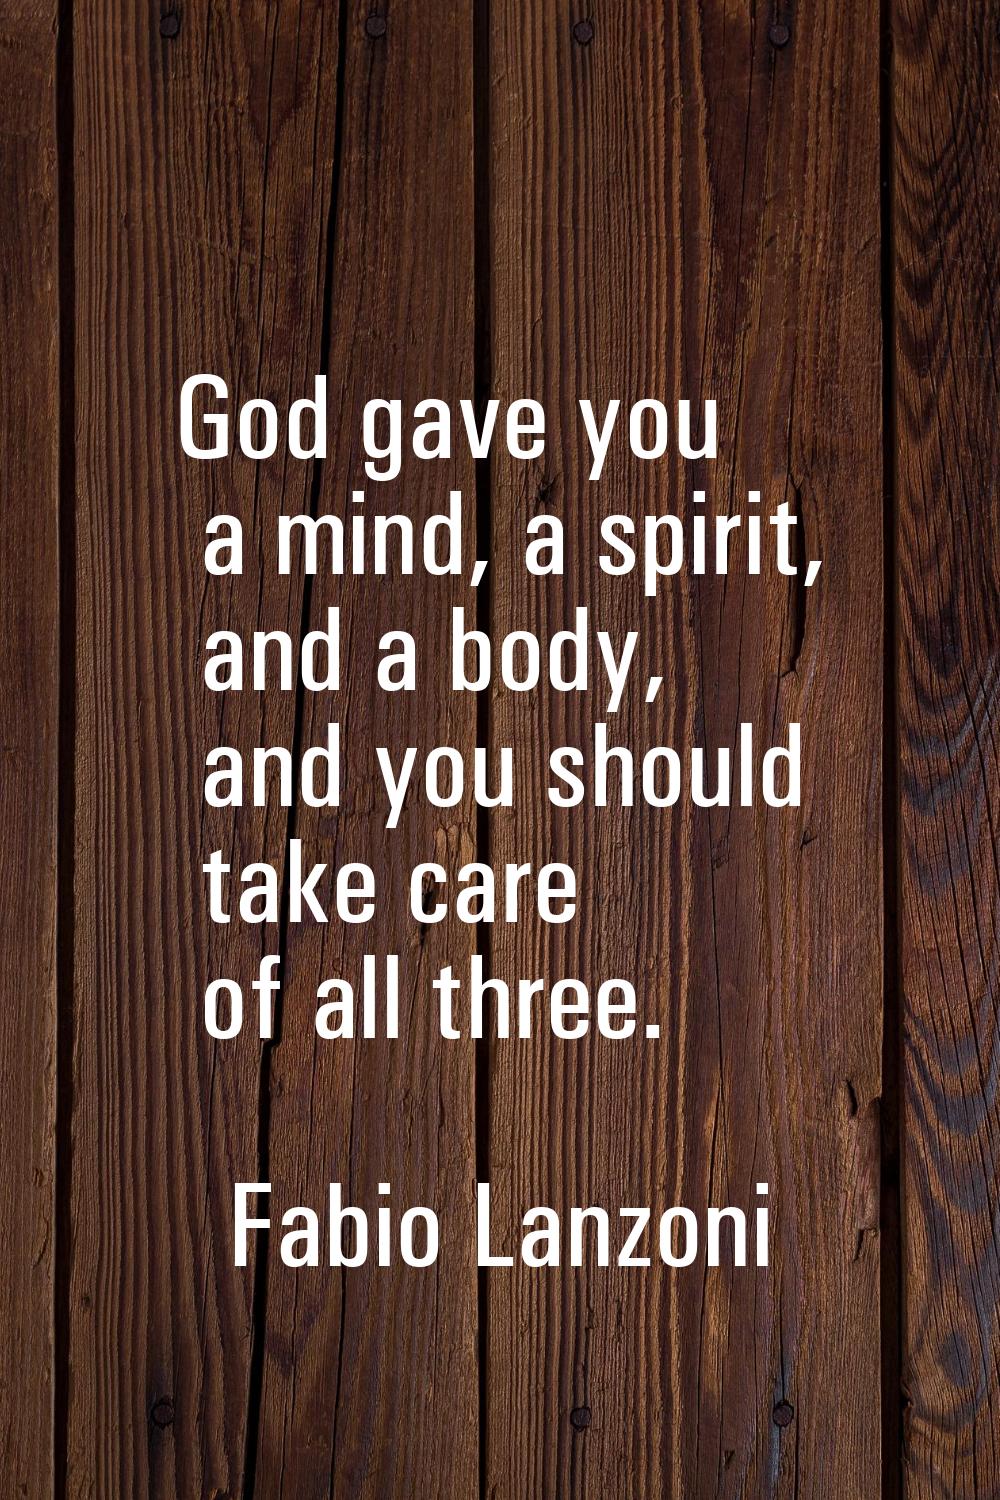 God gave you a mind, a spirit, and a body, and you should take care of all three.